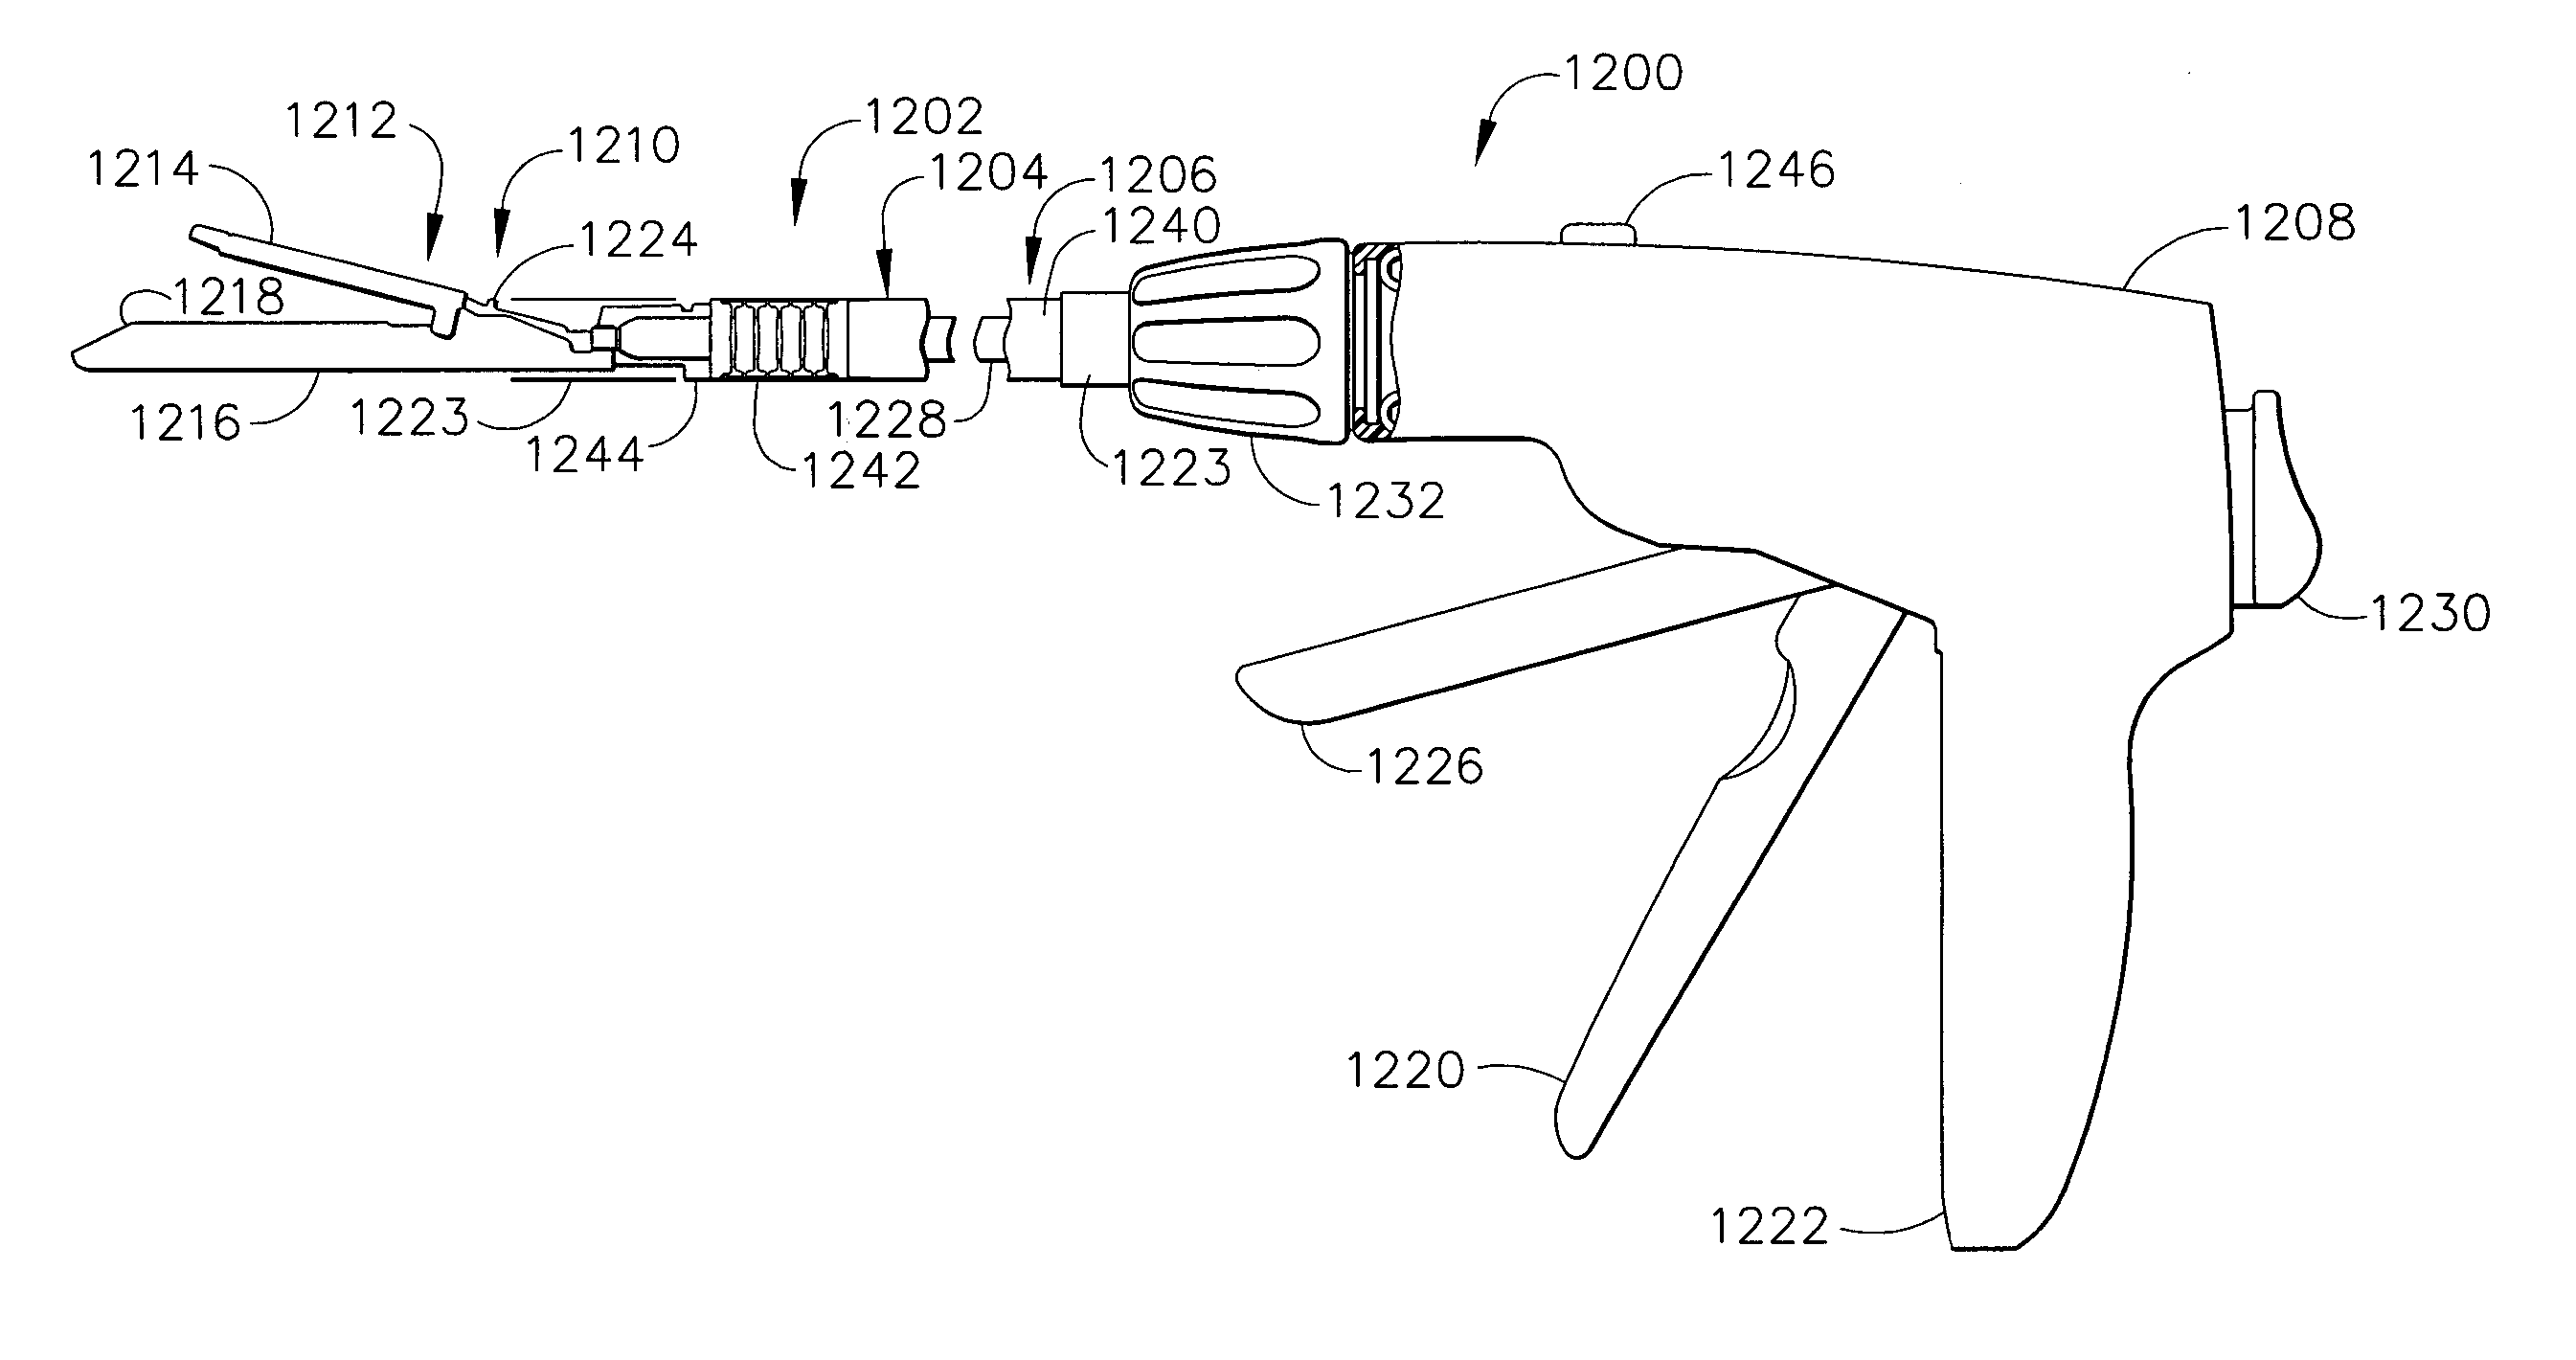 Surgical instrument incorporating an electrically actuated articulation mechanism